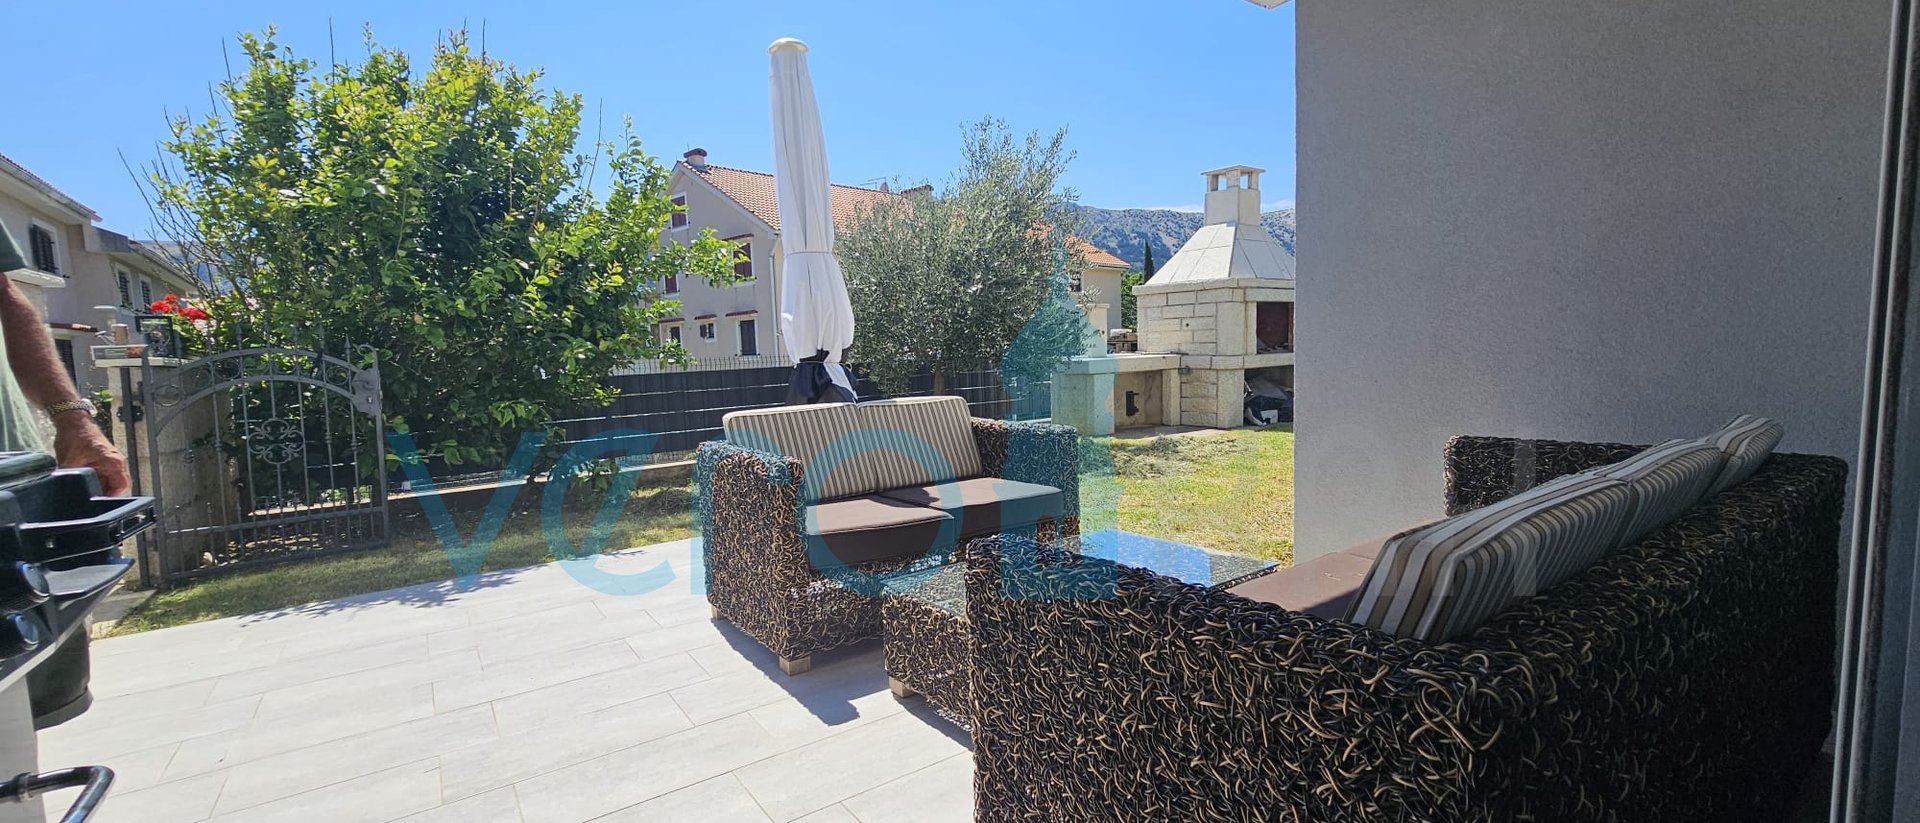 Island of Krk, Baška, 2 bedroom apartment on the ground floor with a large garden, for sale